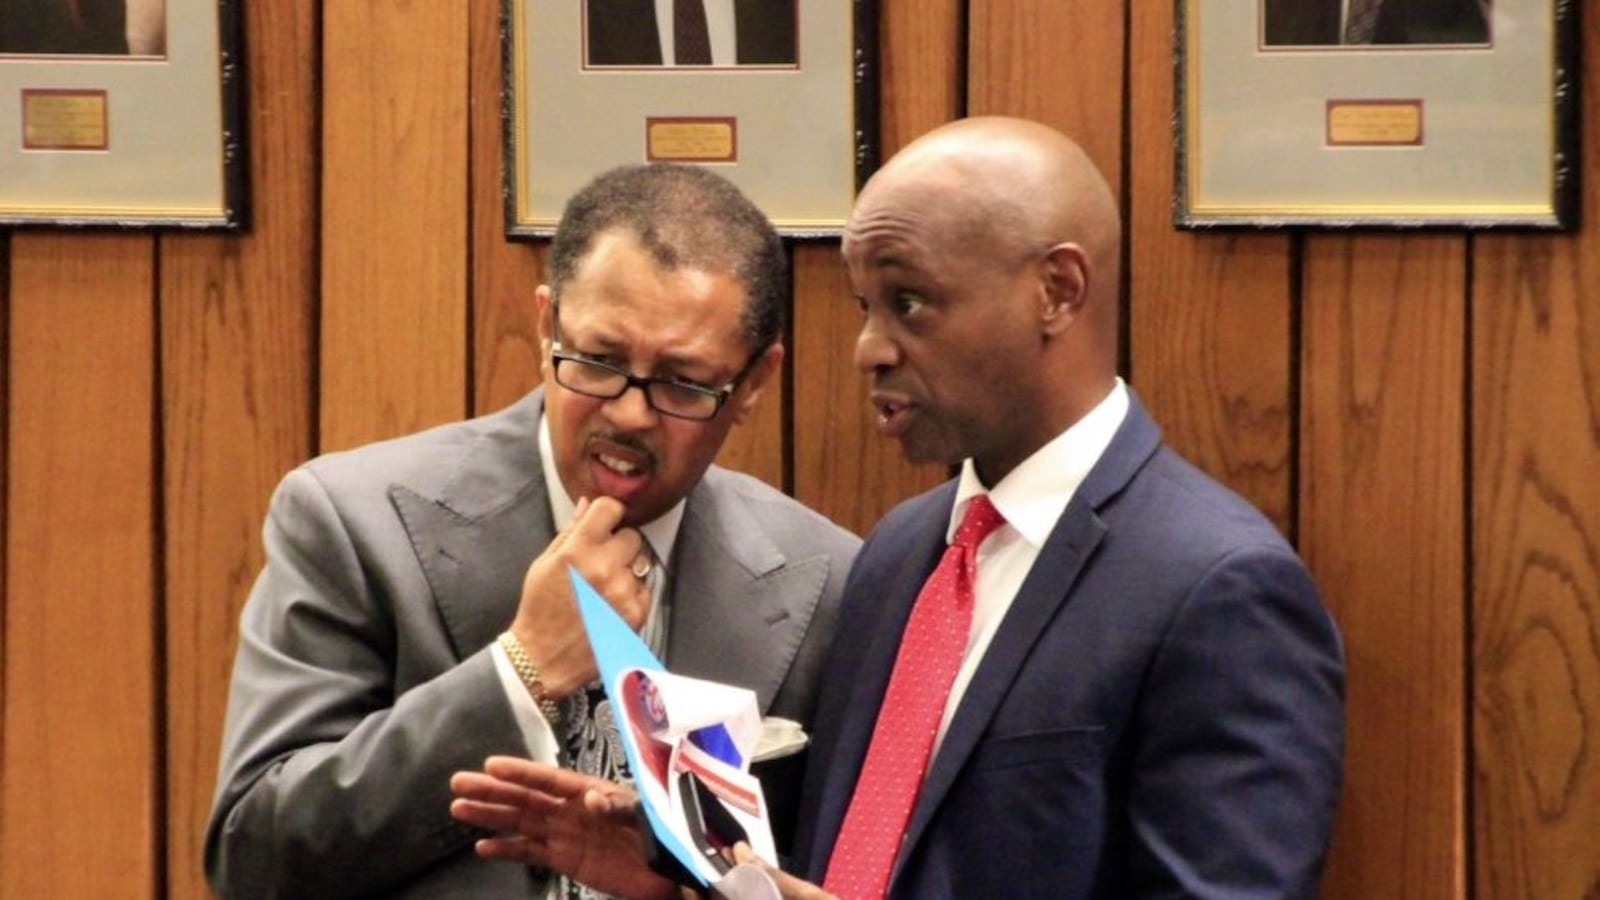 From left: Shelby County Commissioner Willie Brooks and Schools Superintendent Dorsey Hopson confer about education funding in the county’s budget in June 2016.